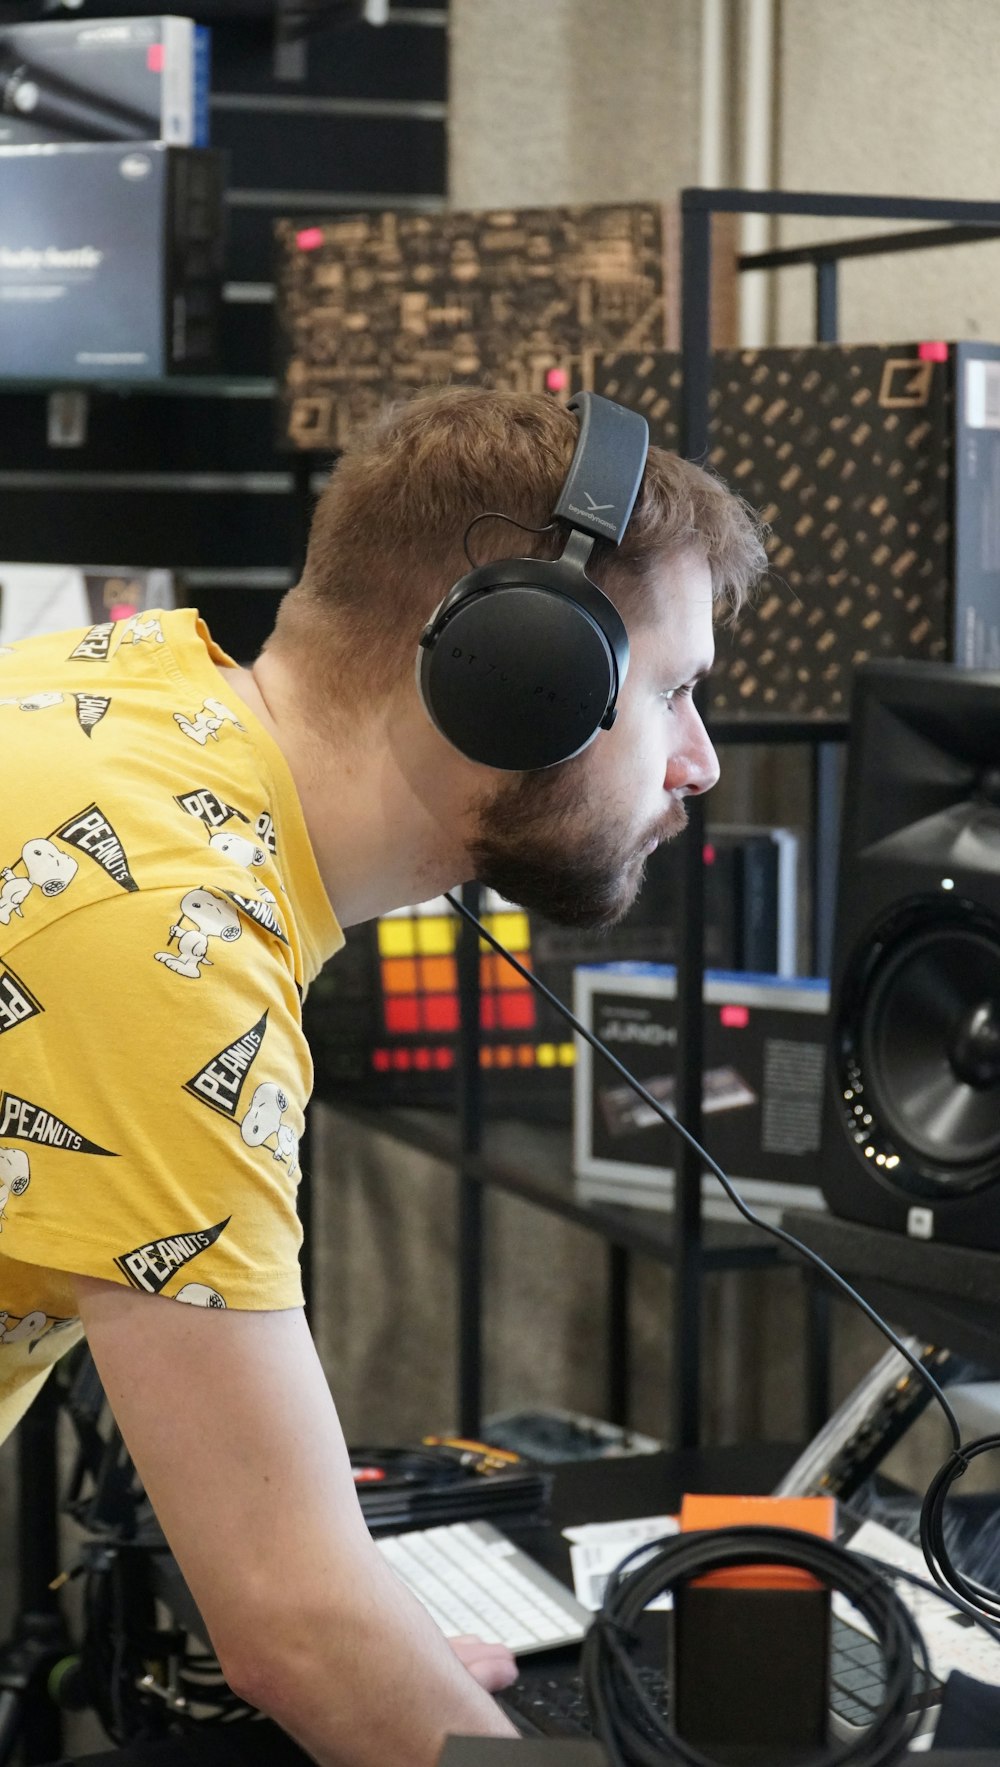 a man wearing headphones and a yellow shirt